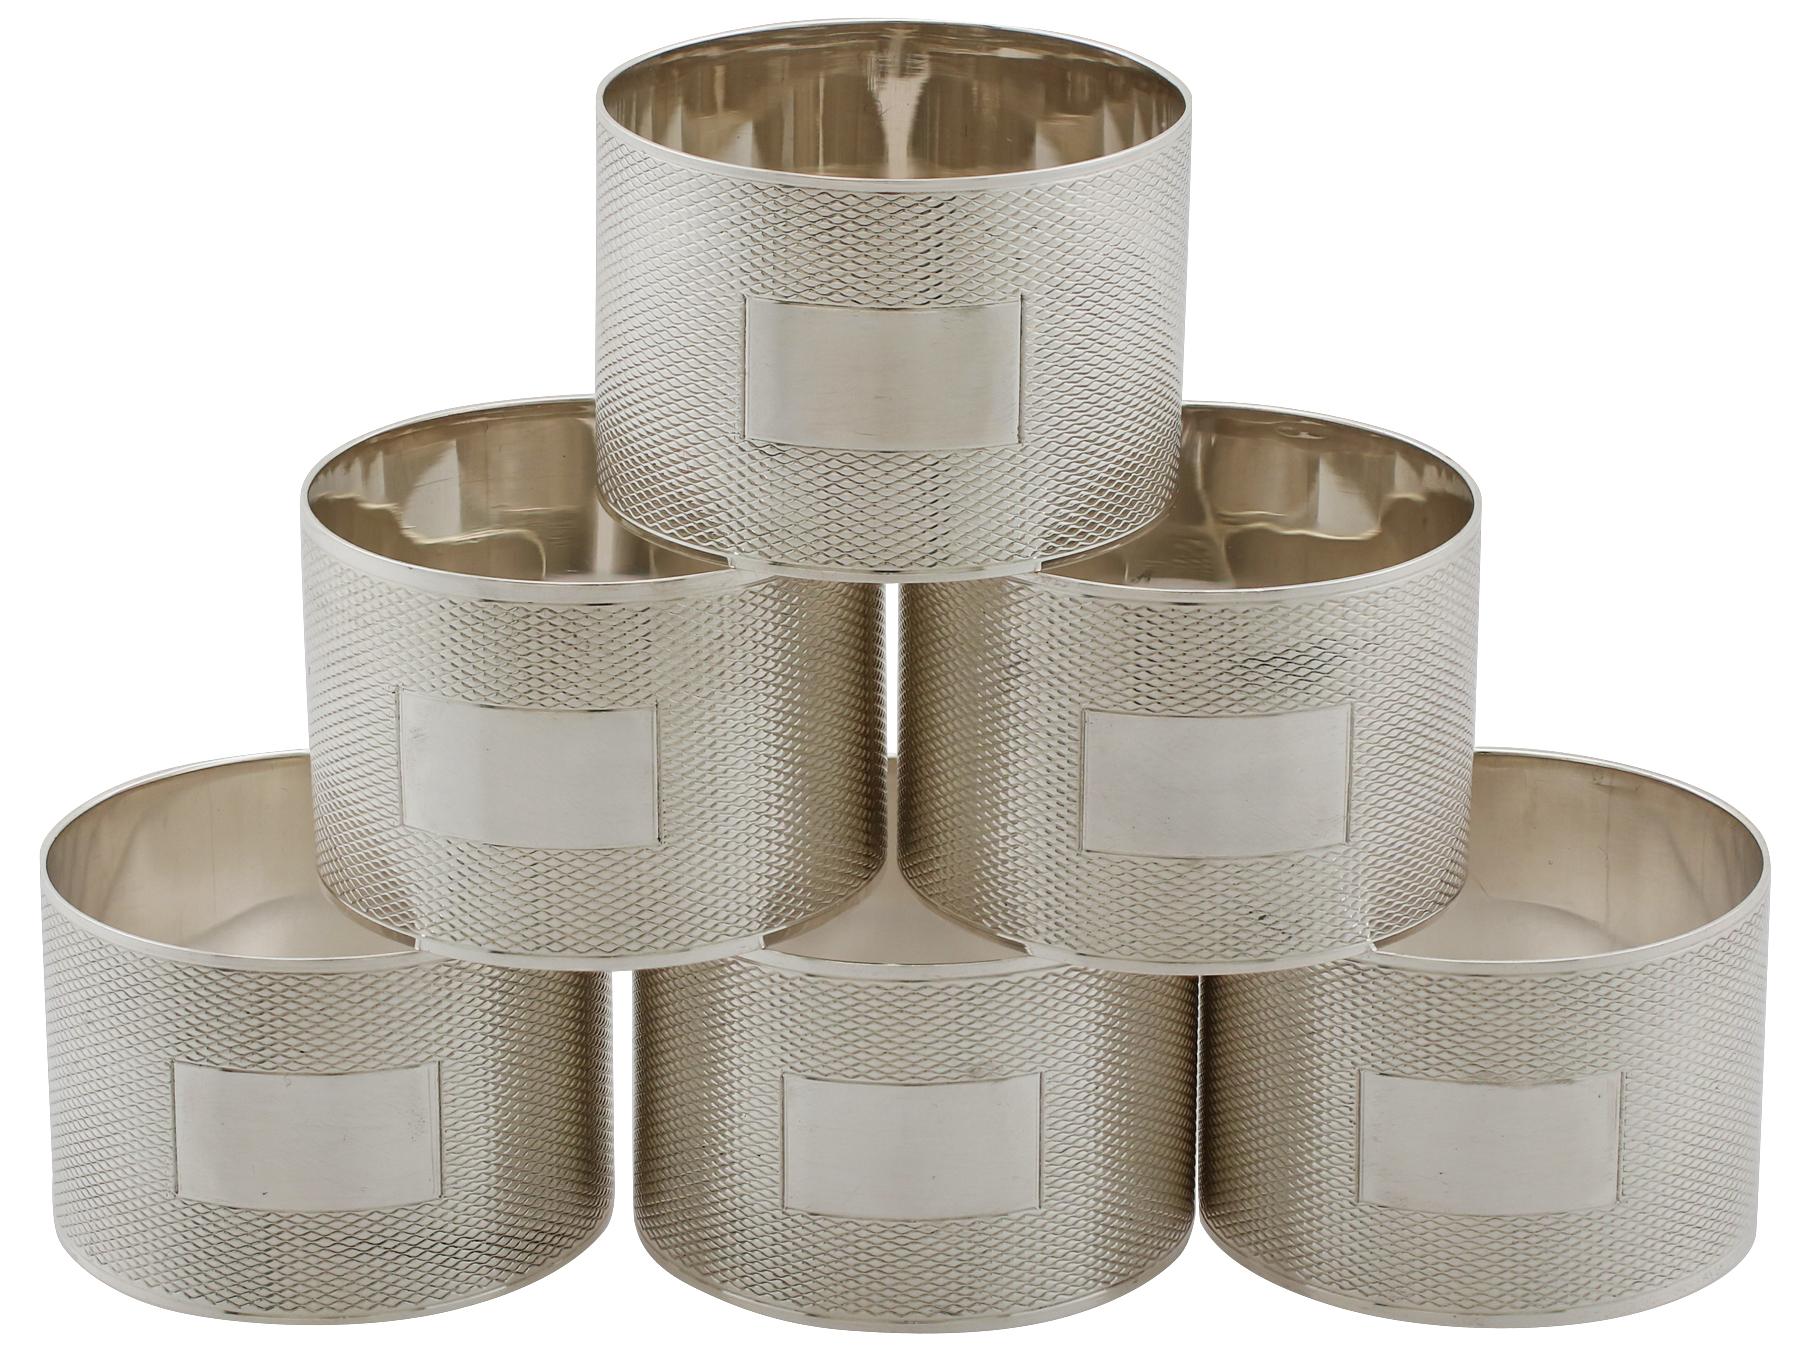 An exceptional, fine and impressive pair of vintage Elizabeth II English sterling silver napkin rings boxed, part of our dining silverware collection.

These exceptional vintage sterling silver napkin rings have a cylindrical form.

The surface